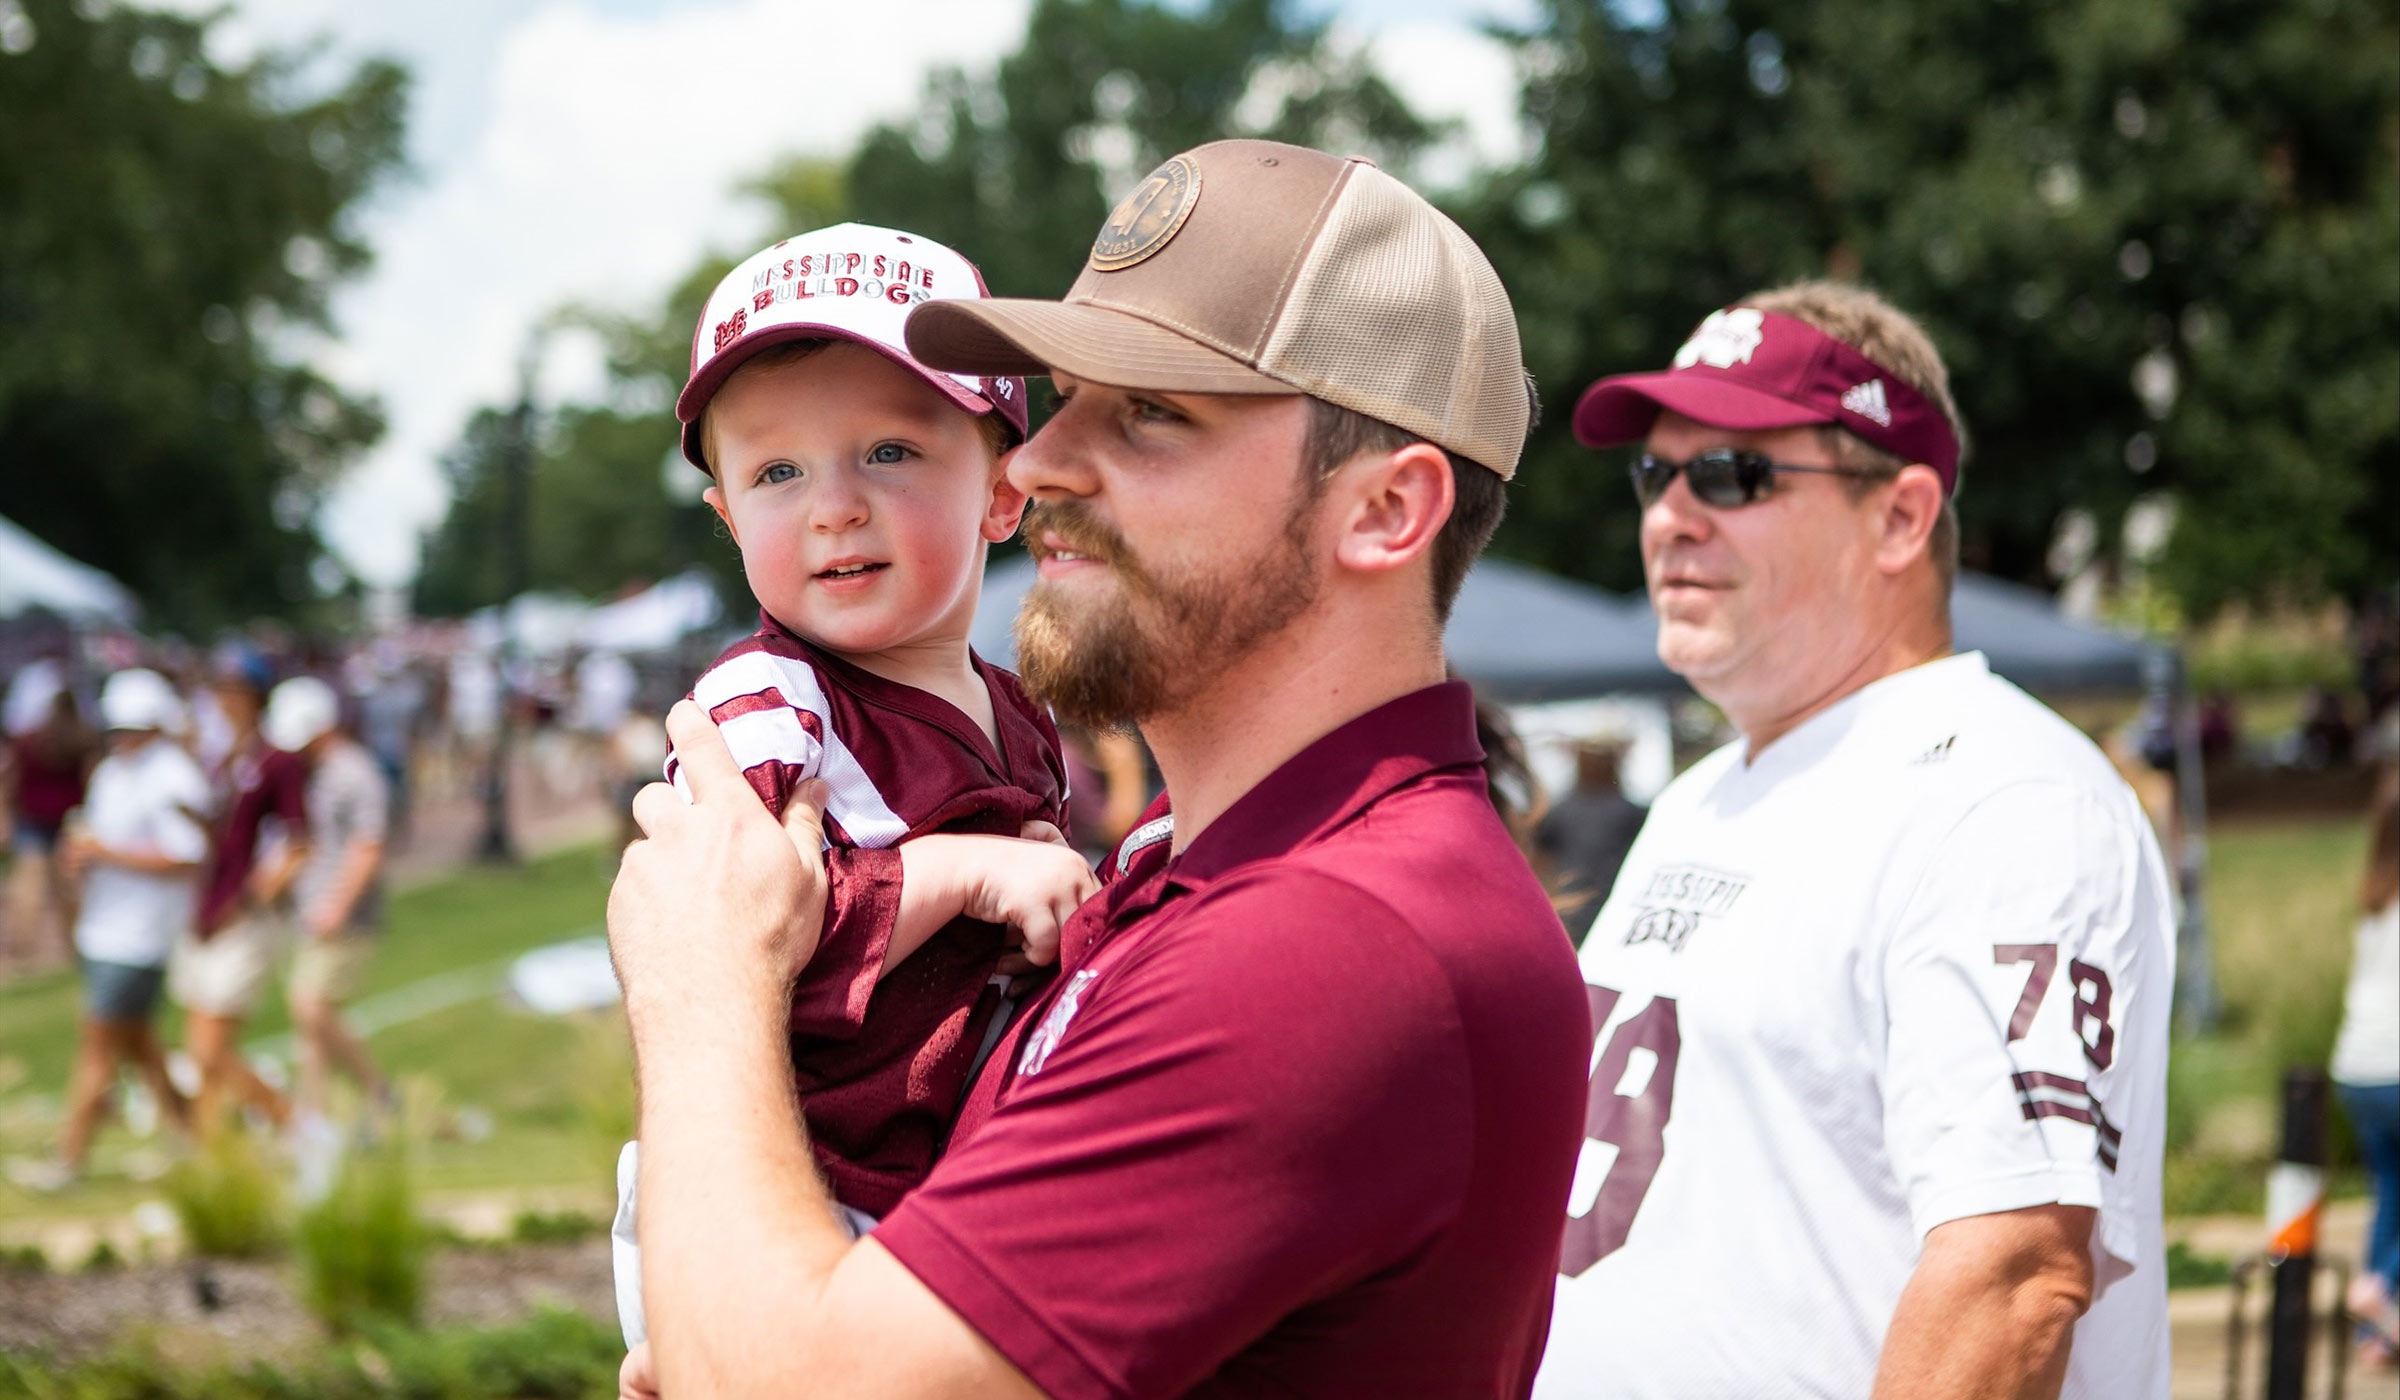 Man in maroon polo carrying kid in maroon and white jersey with baseball cap